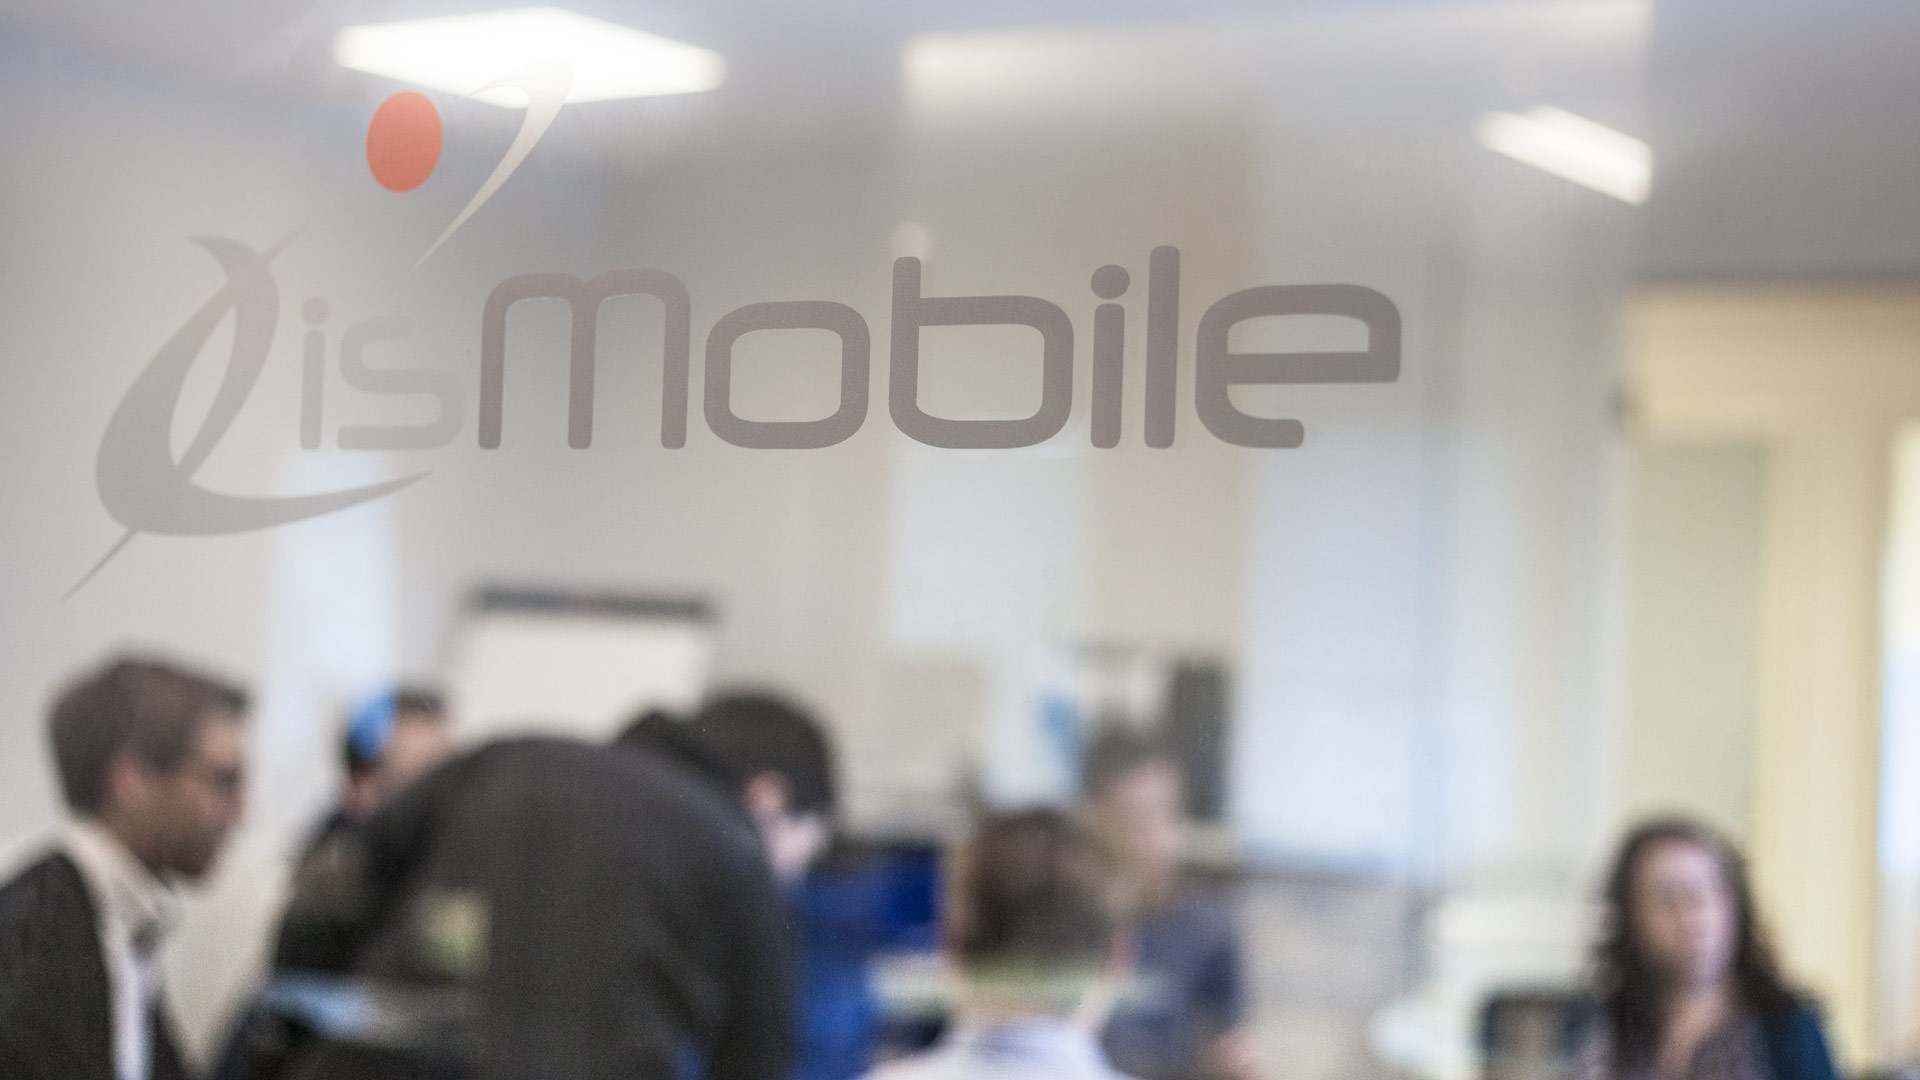 Join the isMobile team